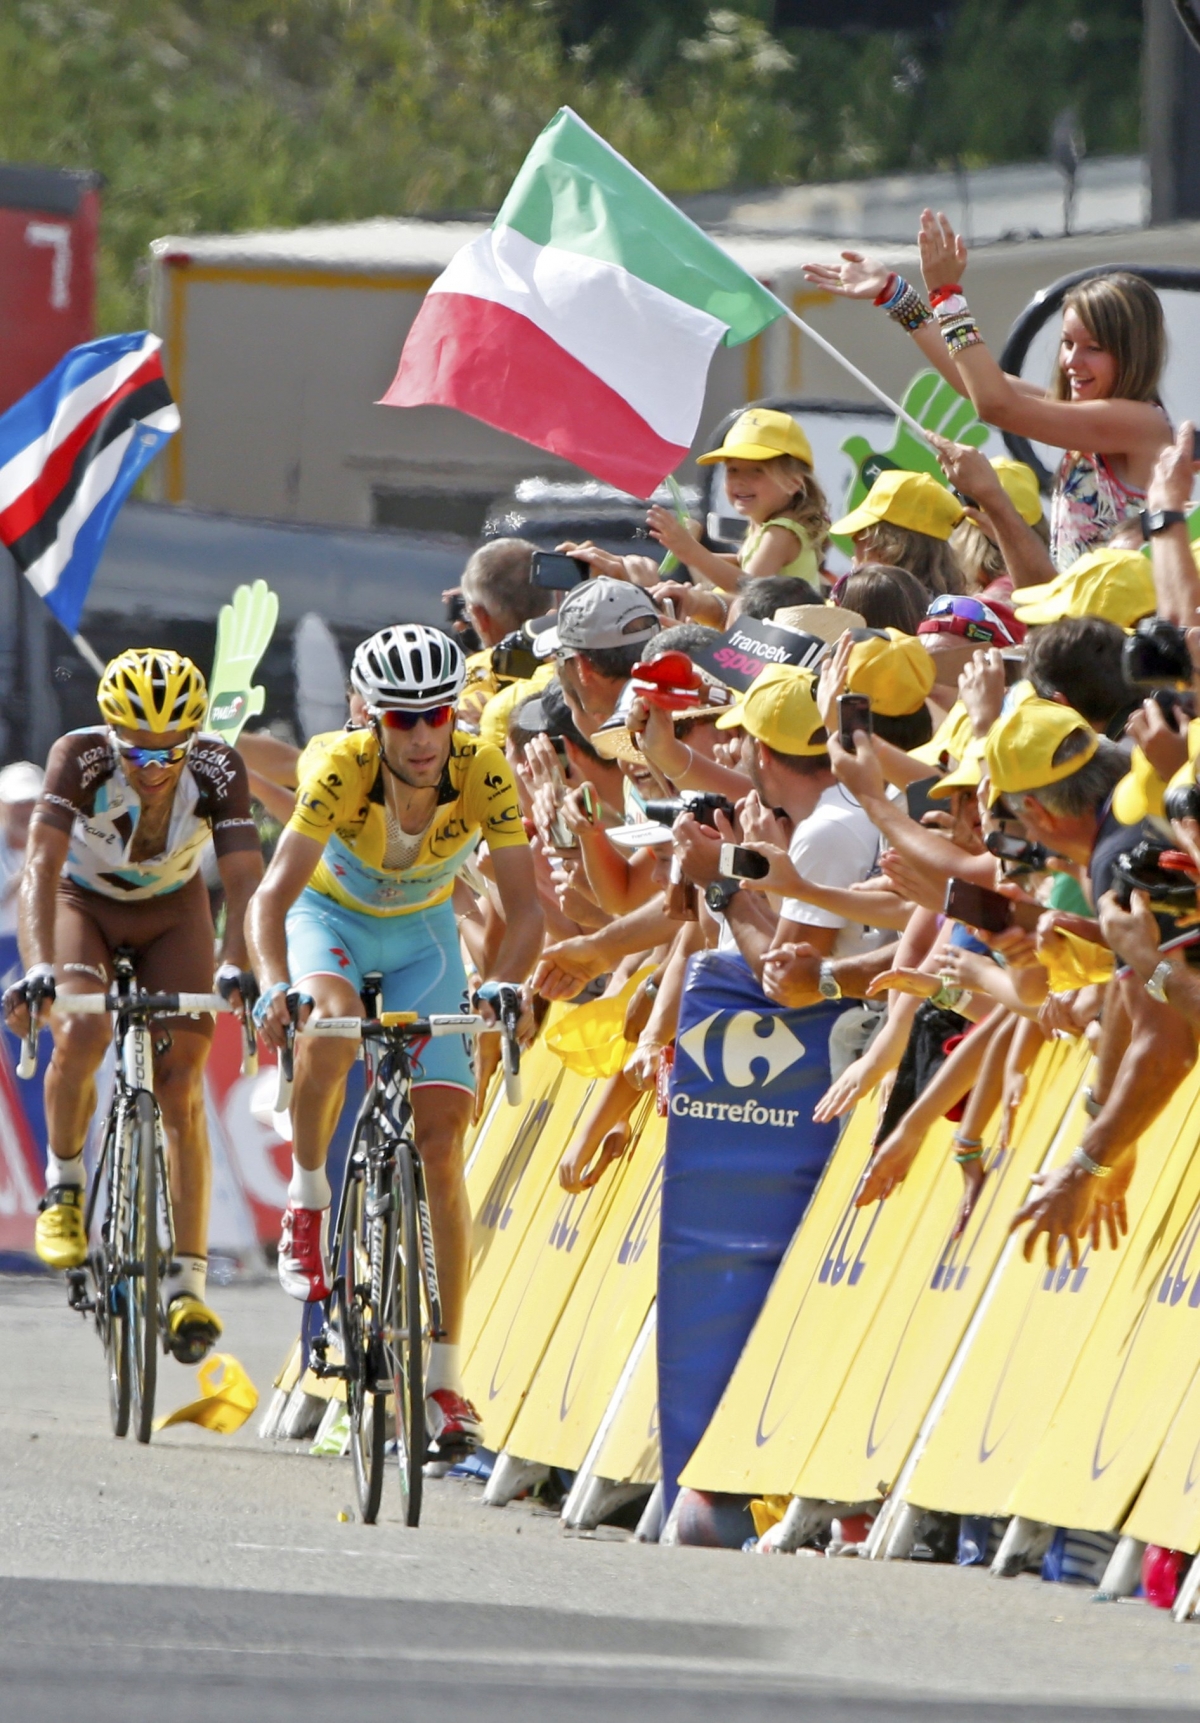 Tour de France 2014 Live Streaming Information Watch Stage 15 Online